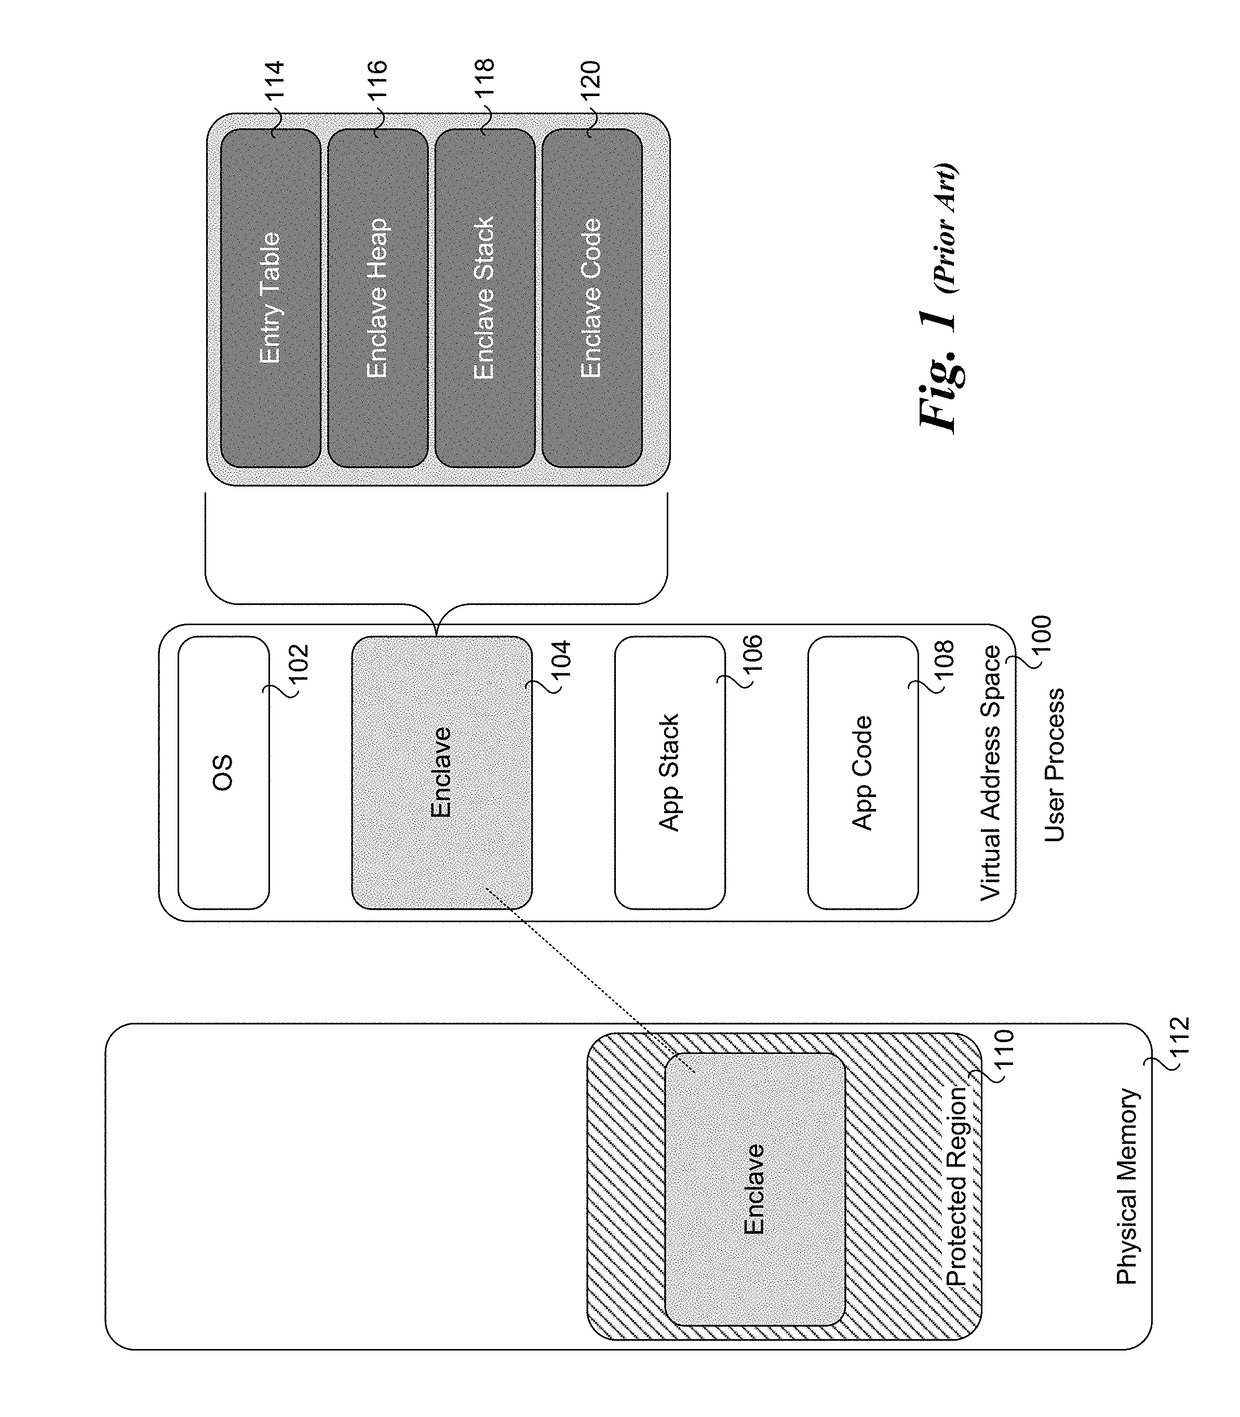 Method to increase cloud availability and silicon isolation using secure enclaves